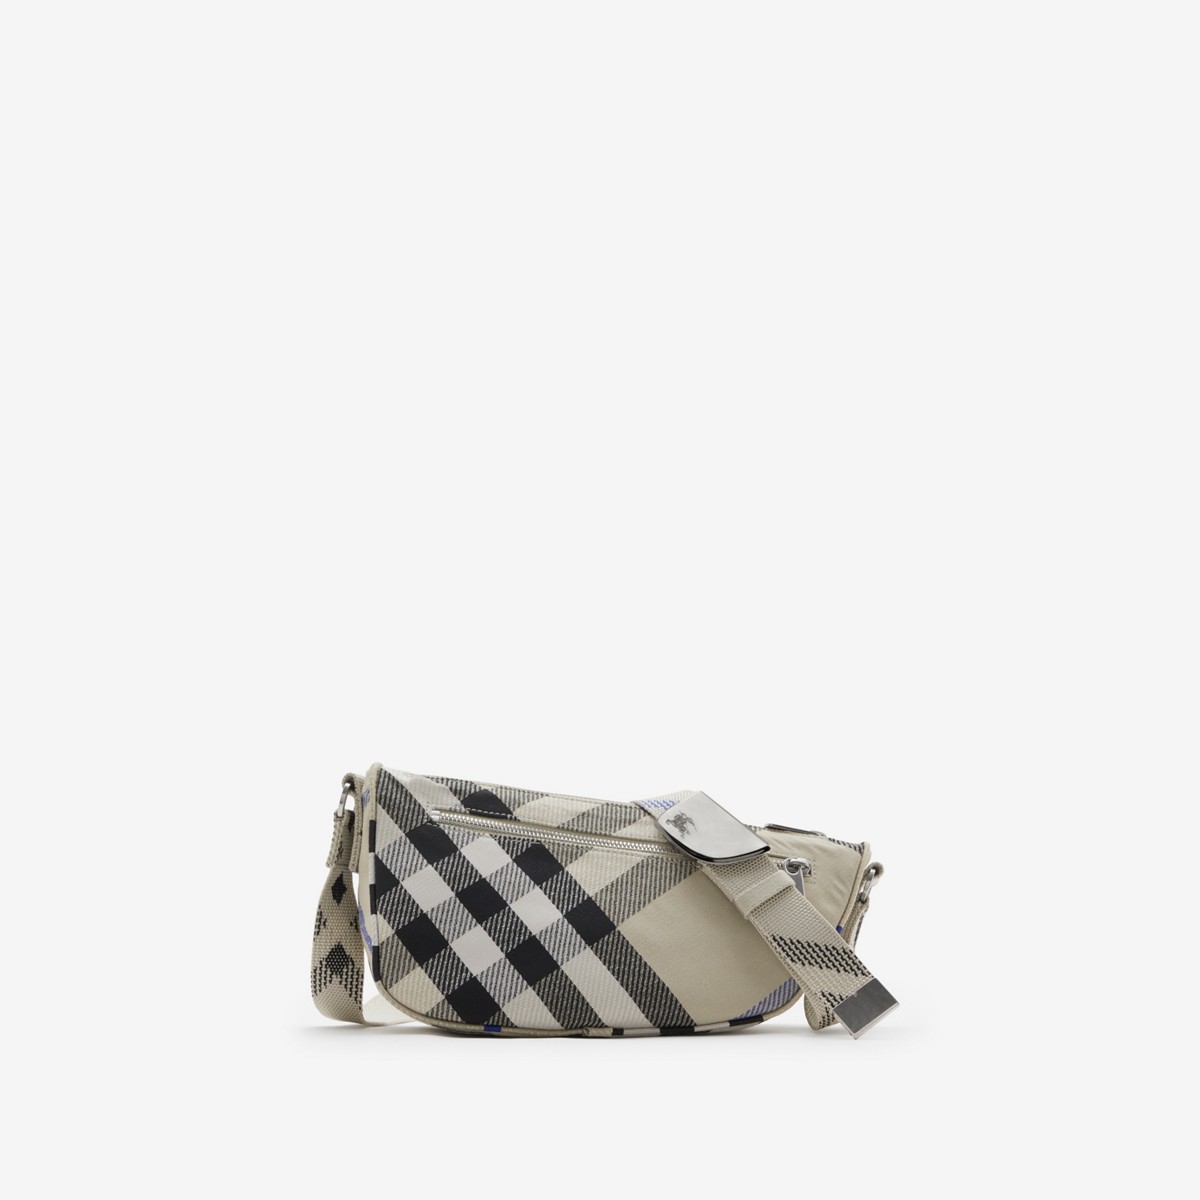 Burberry Small Shield Messenger Bag In Neutral